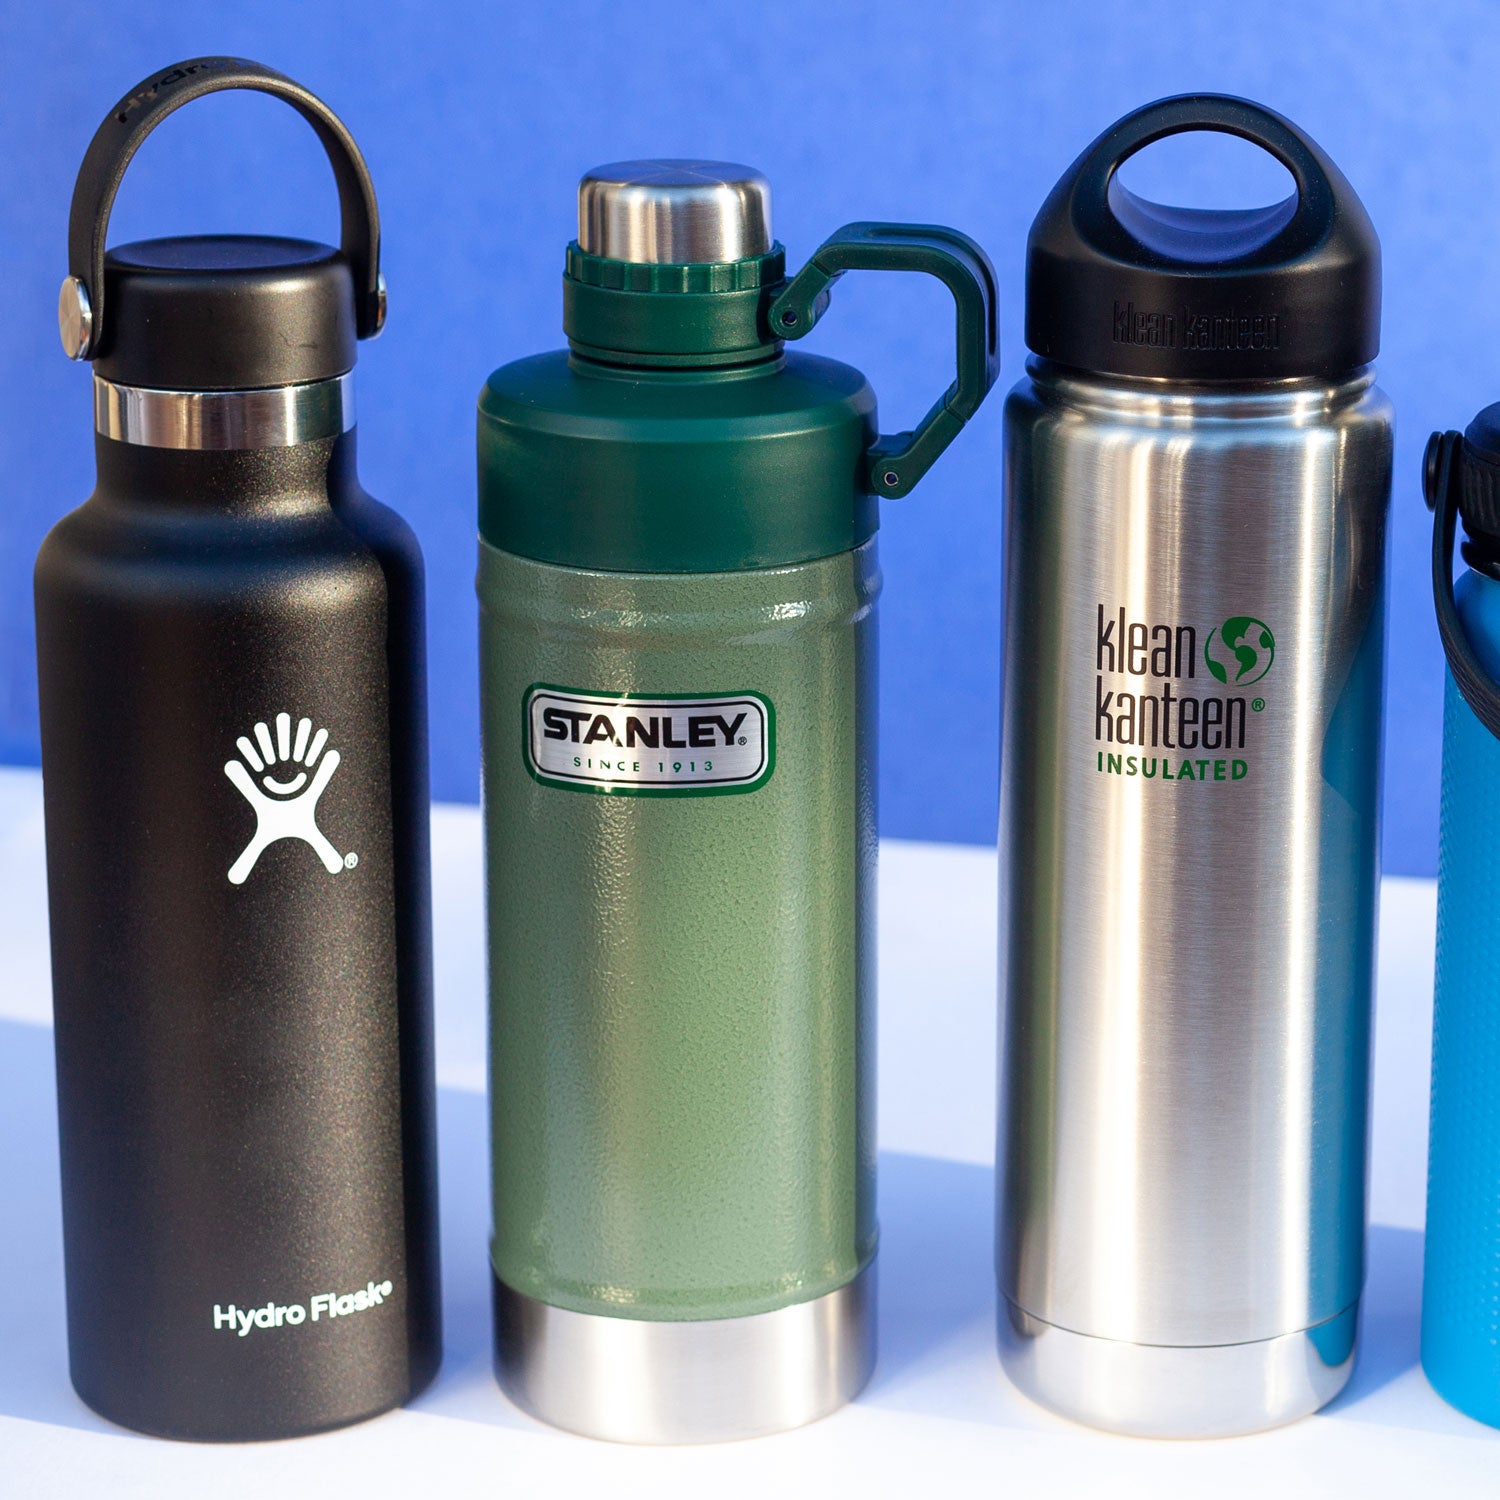 The 10 Best Hydro Flask Accessories in 2022